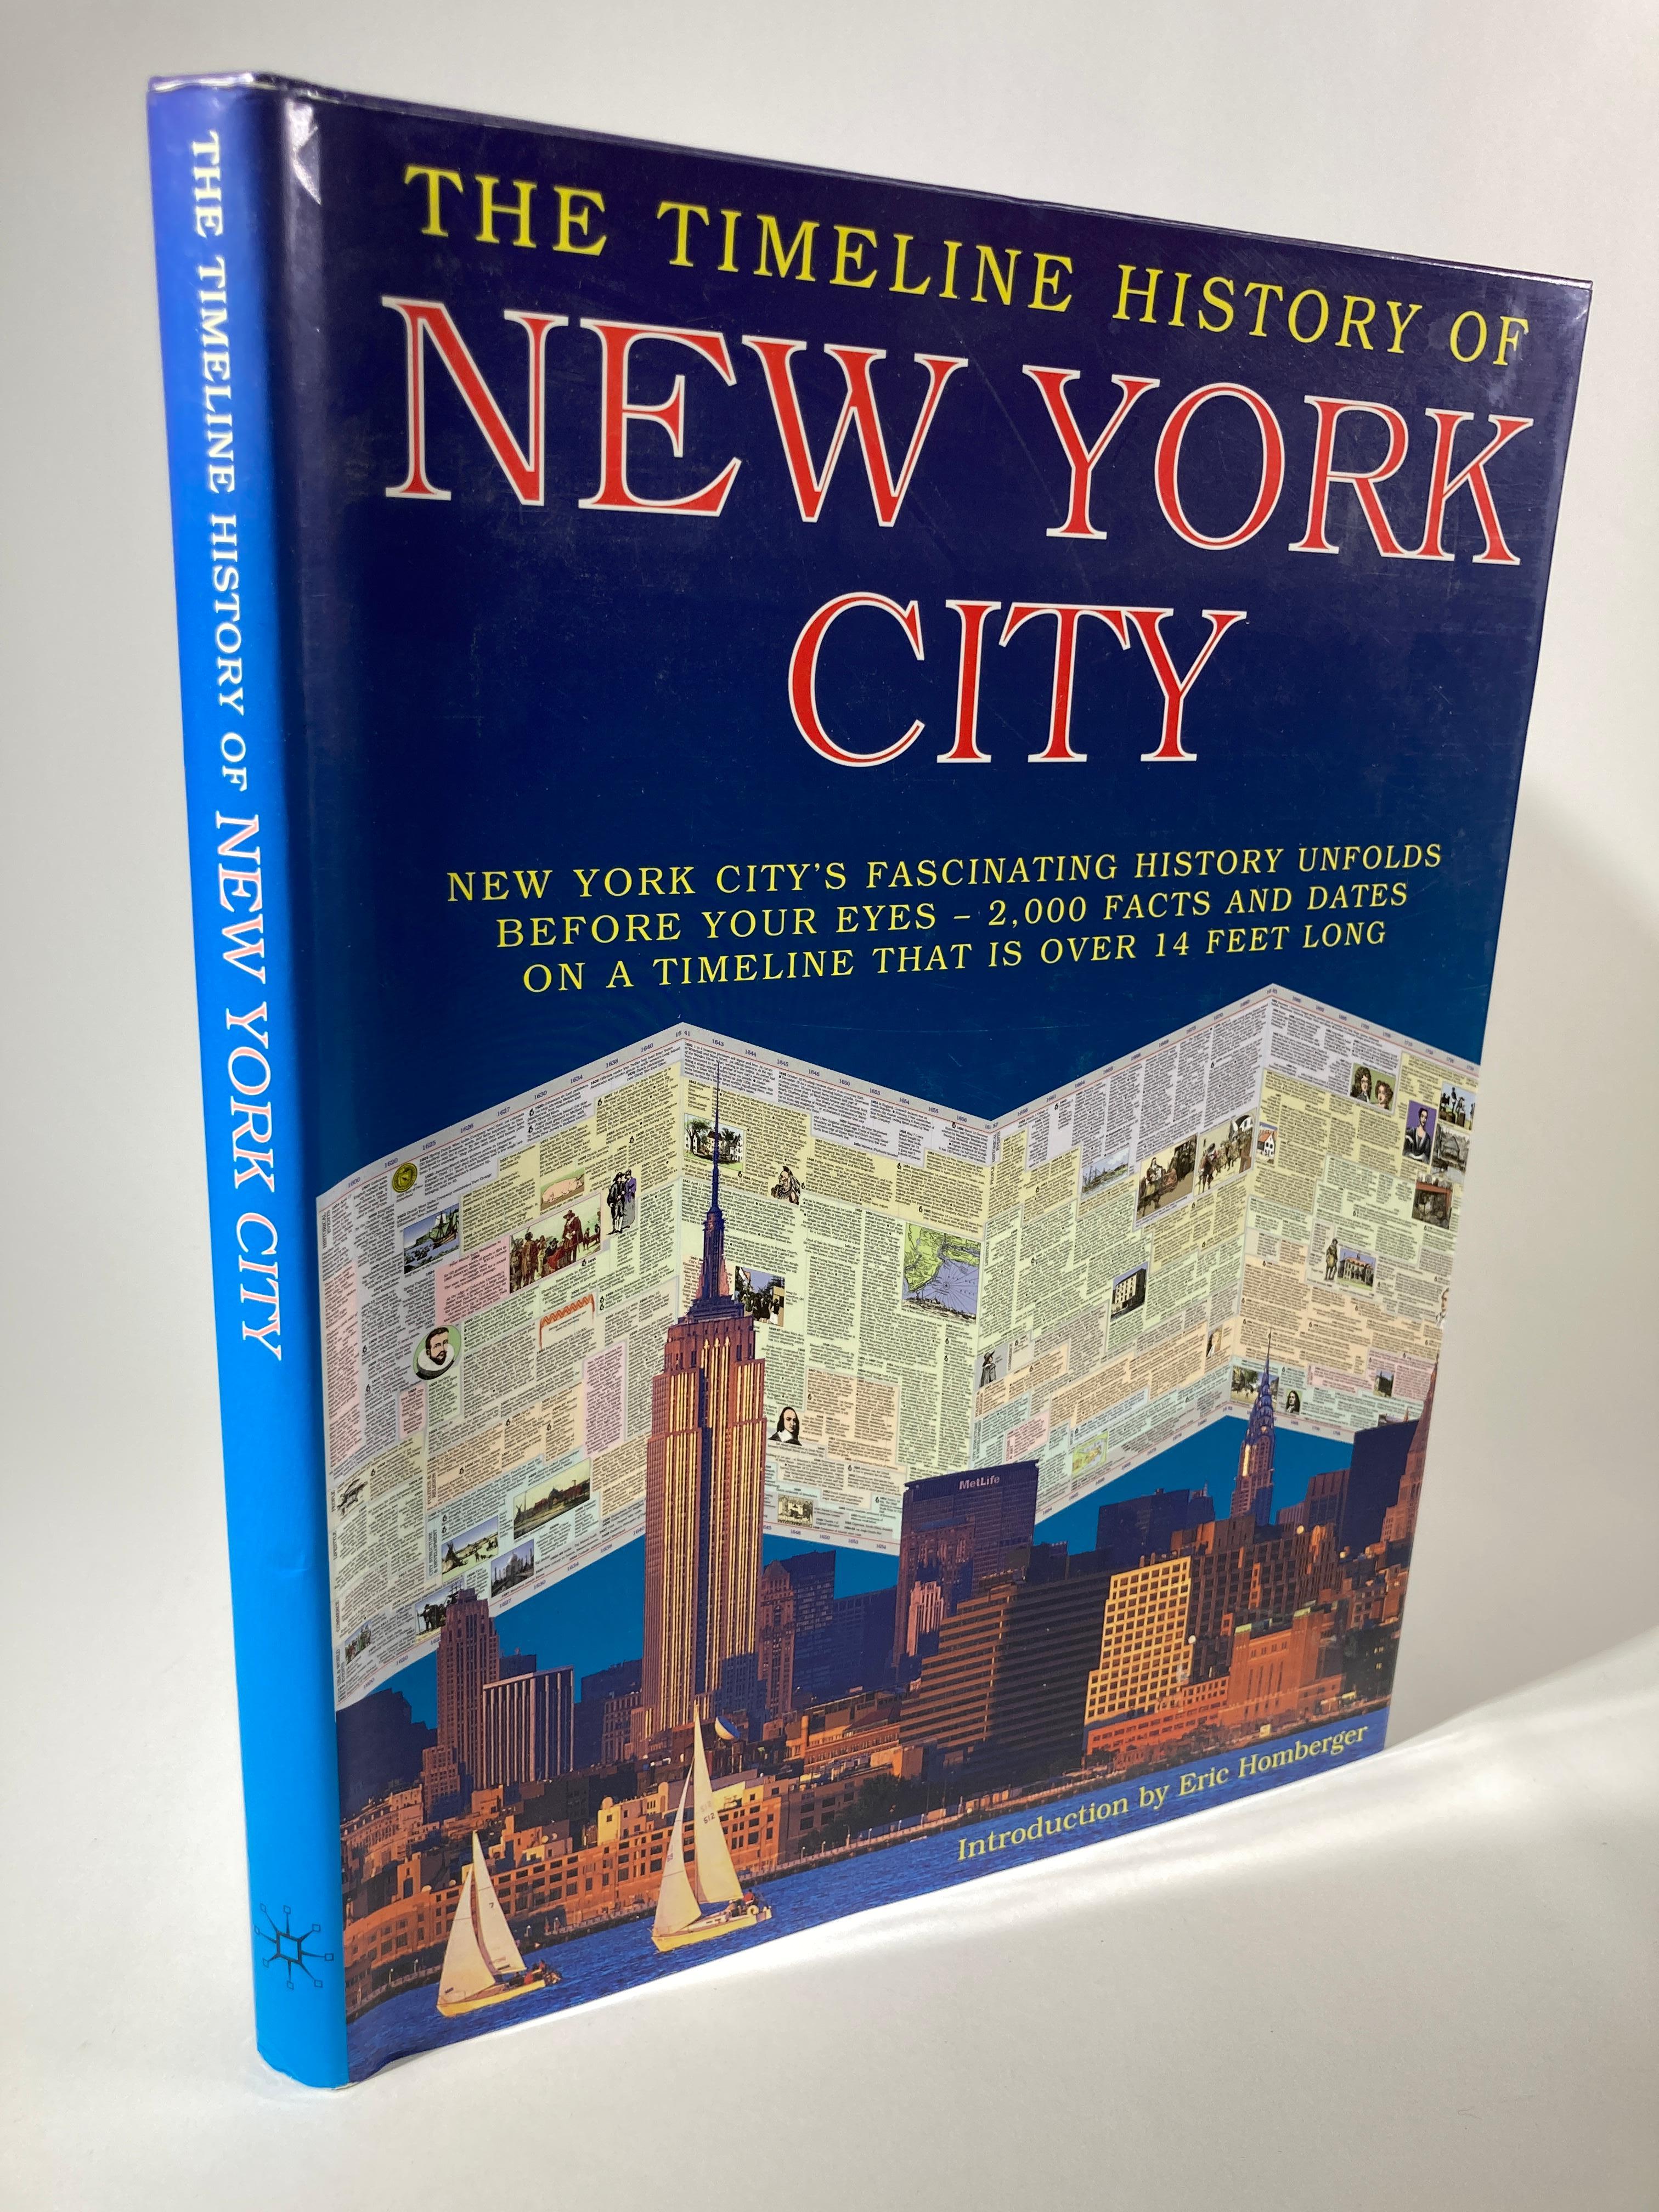 The Timeline History of New York City Book
Playne Books Ltd; 
Worth Press Ltd; 
Hardcover book.
A hands-on presentation of New York's history features a fourteen-foot fold-out timeline, a hand-painted waterway map, a history of Manhattan and the